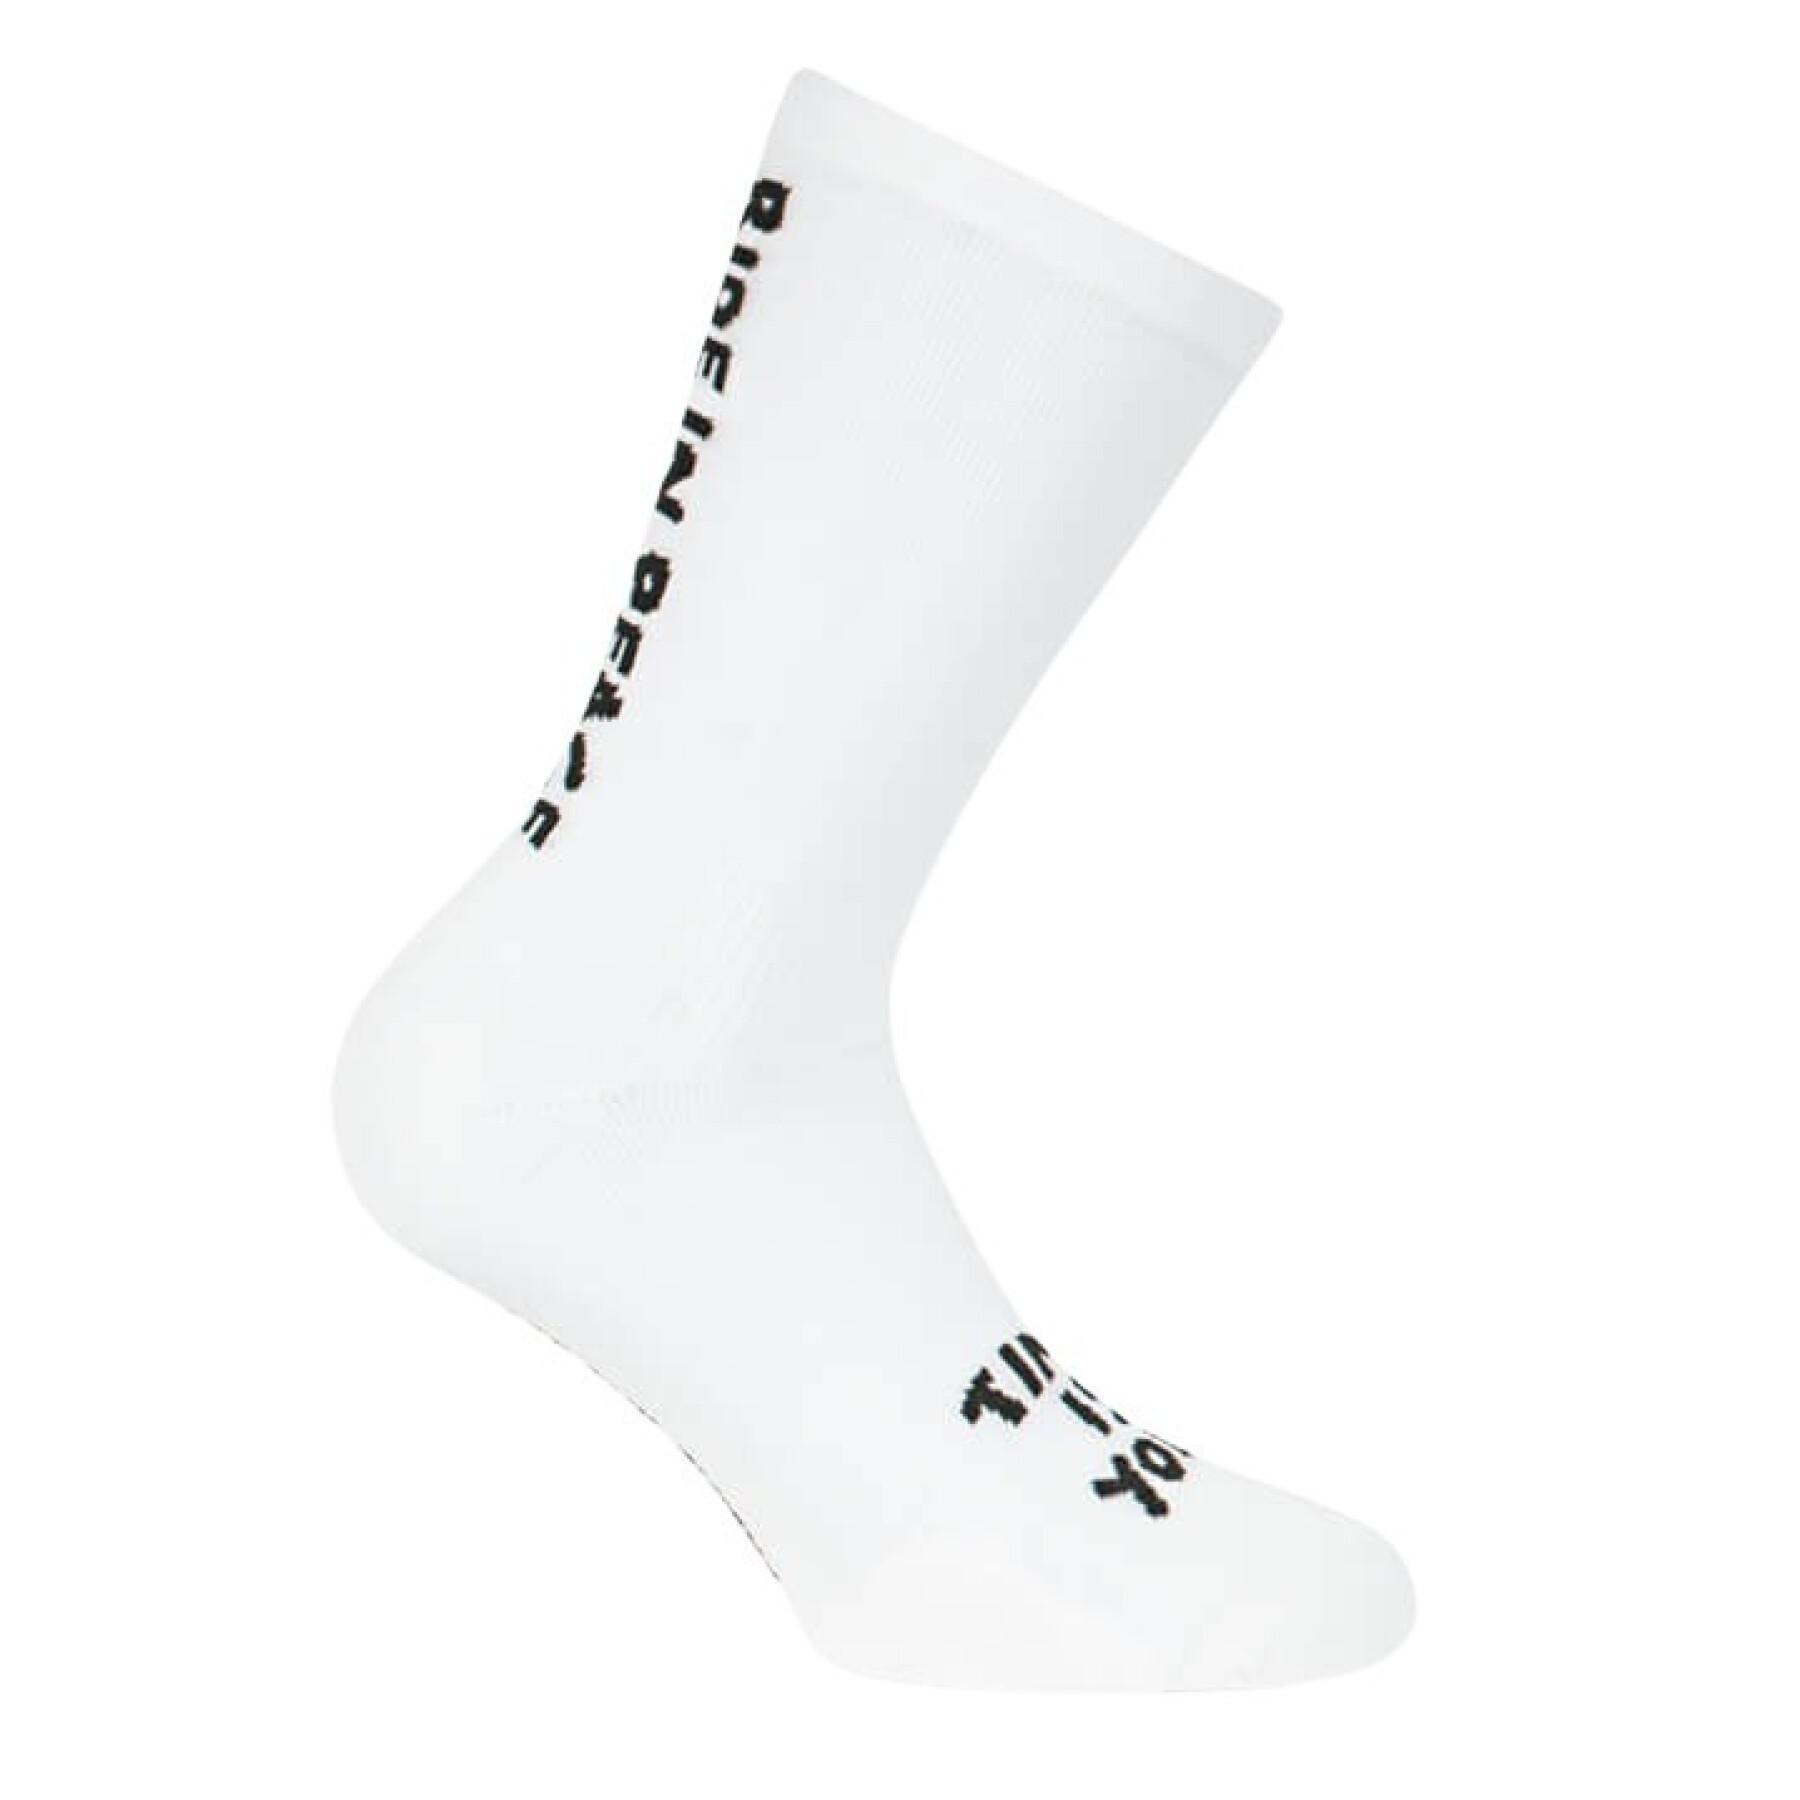 Chaussettes de performance Pacific & Co Ride in peace